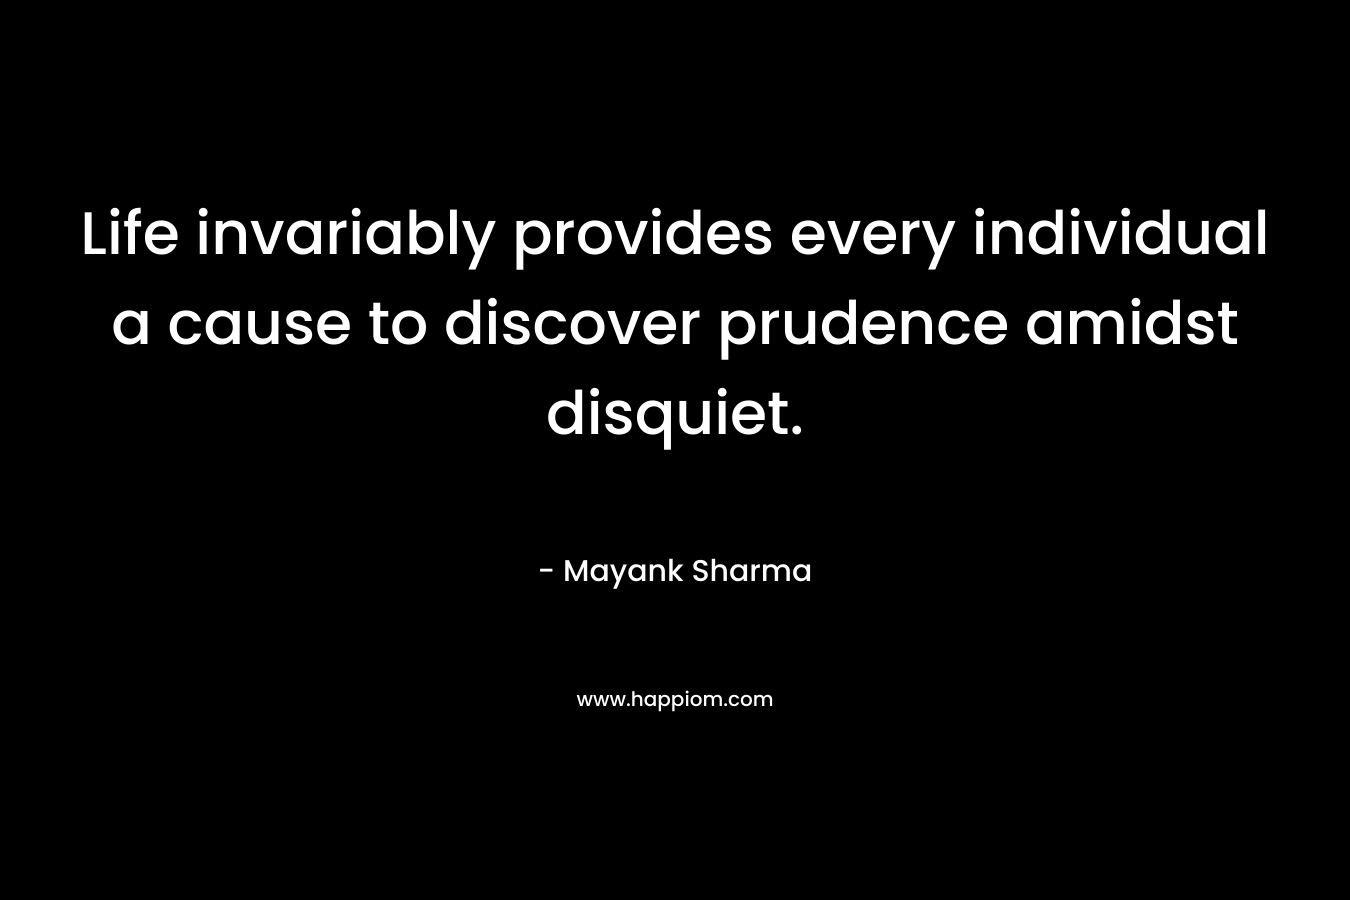 Life invariably provides every individual a cause to discover prudence amidst disquiet. – Mayank Sharma